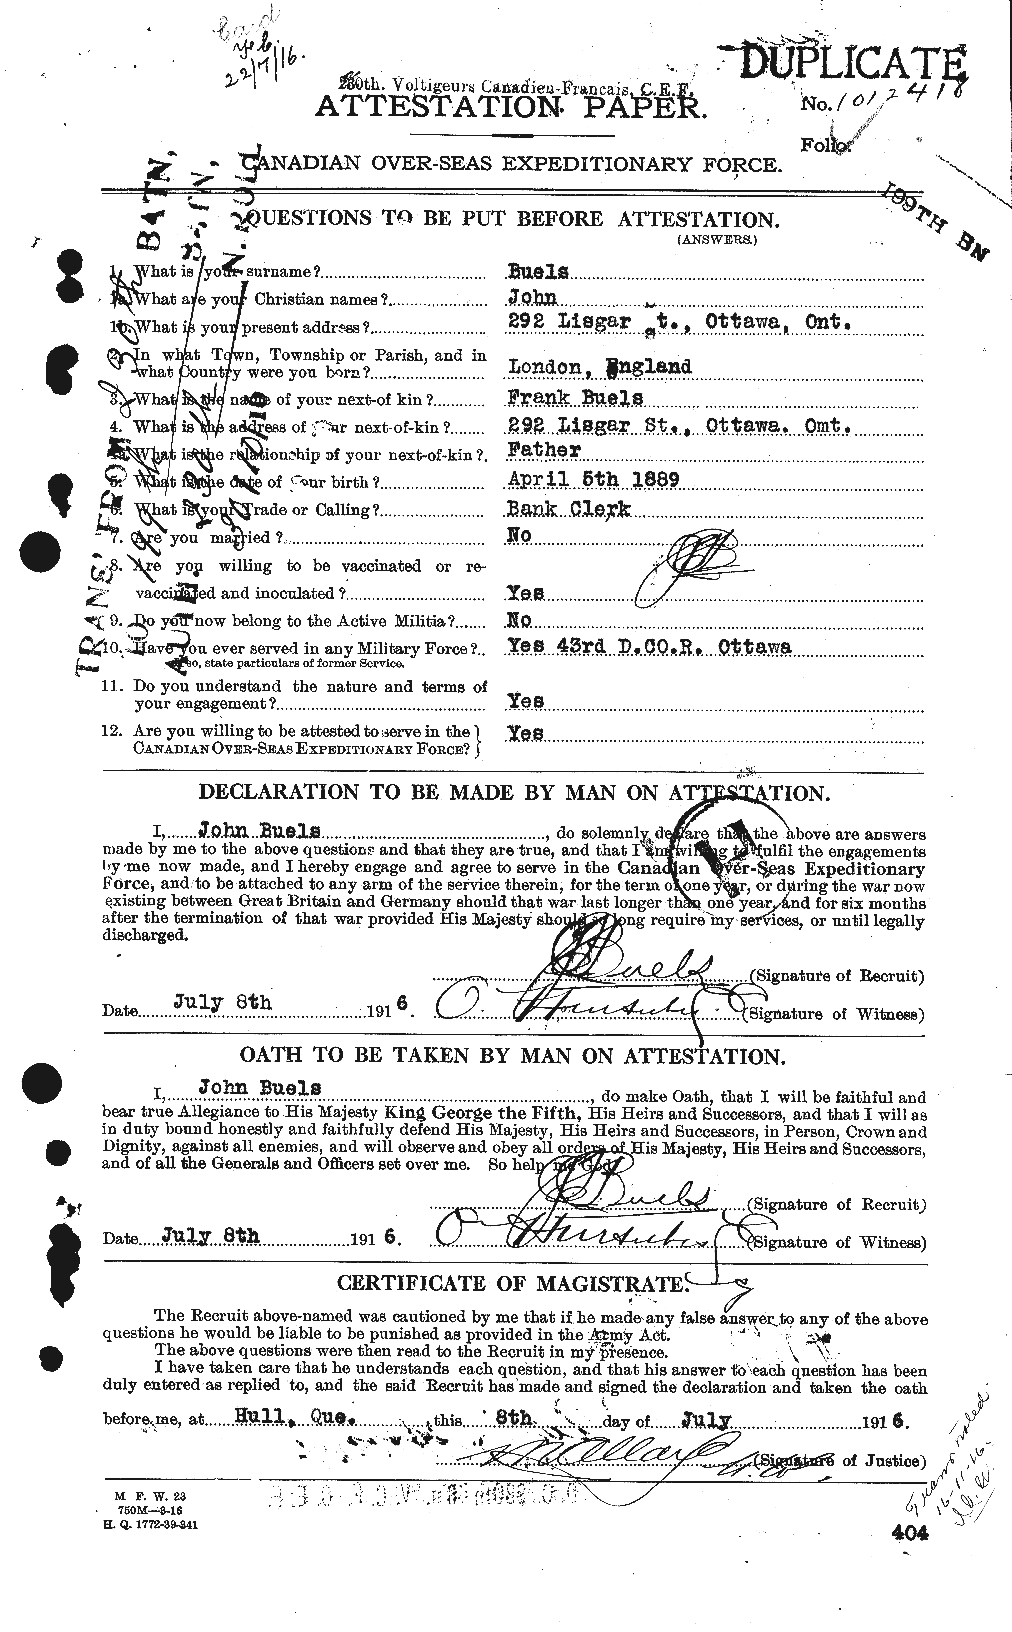 Personnel Records of the First World War - CEF 271421a